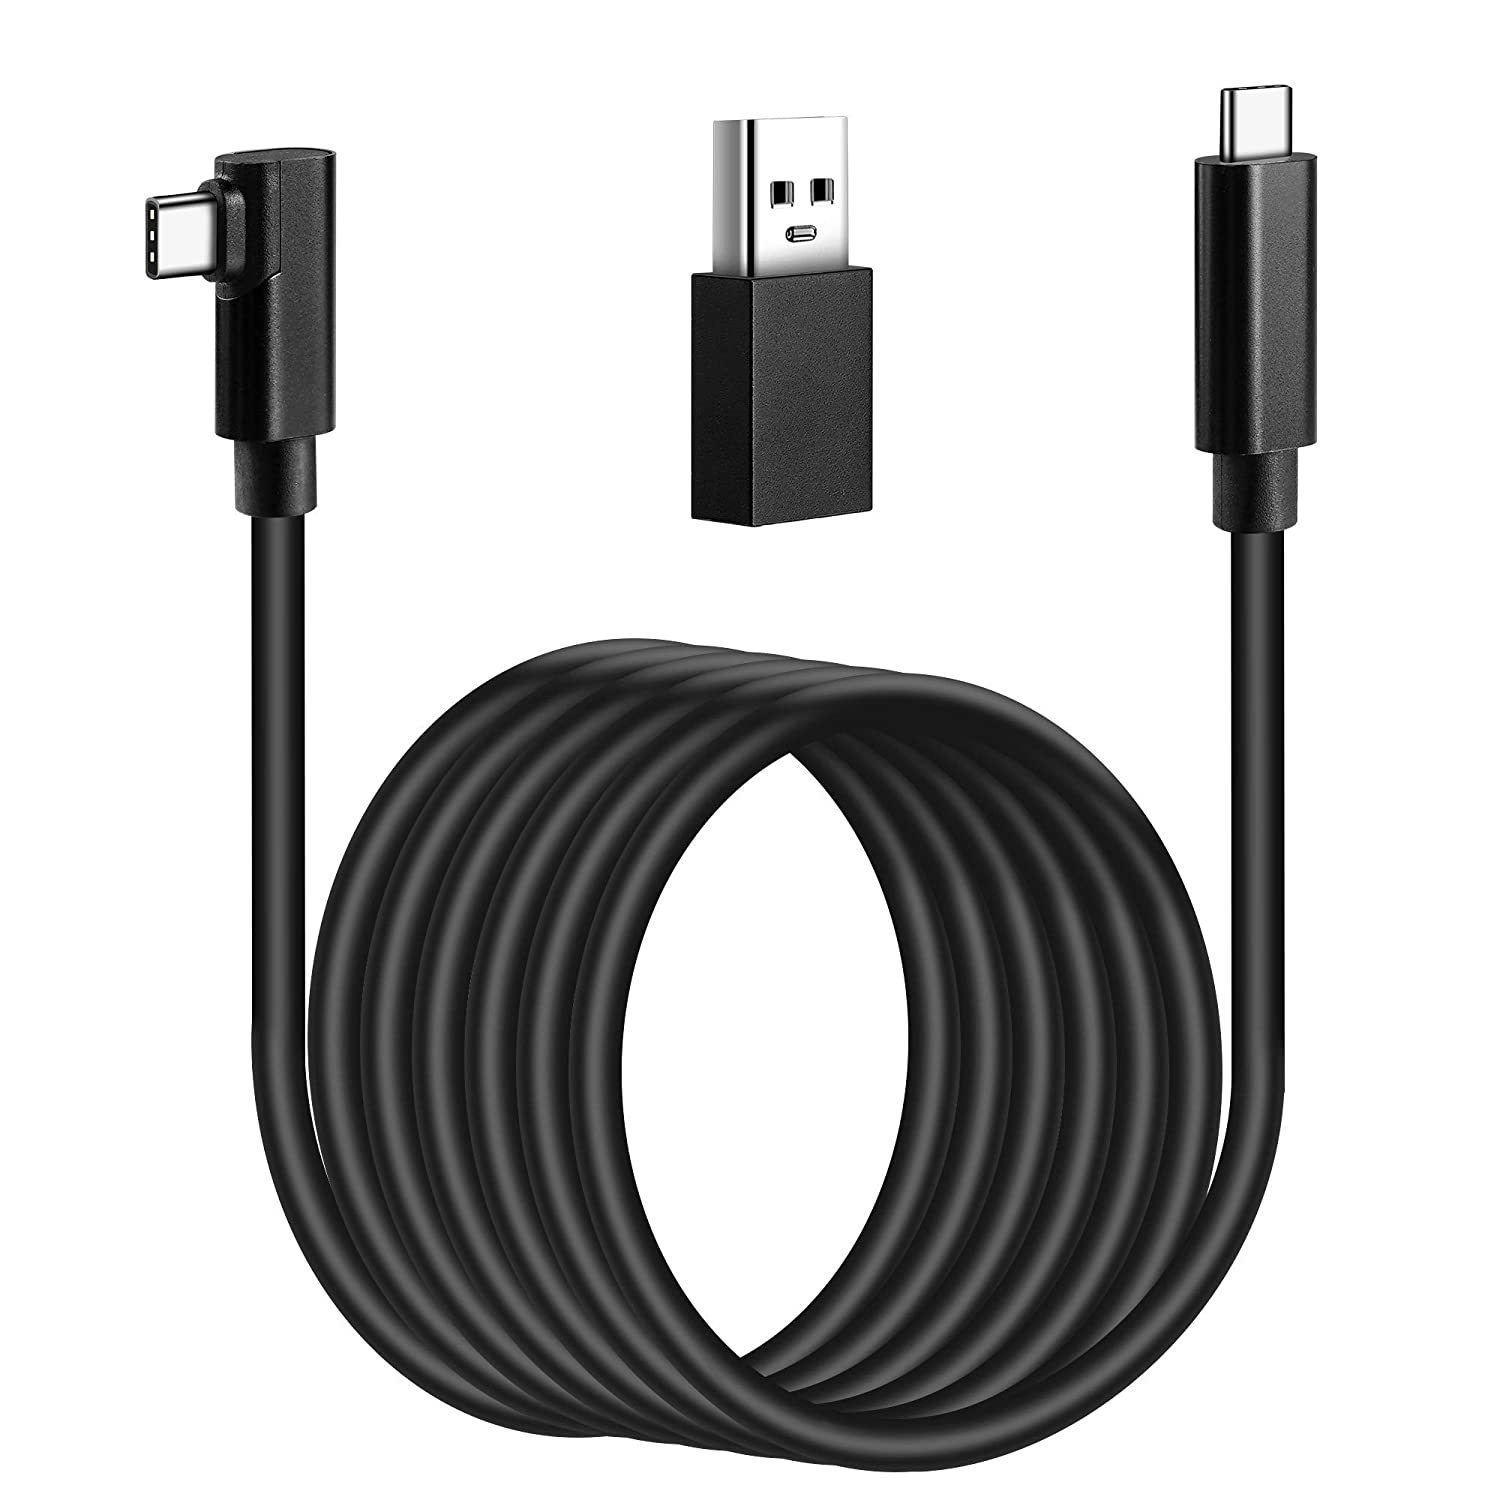 DUOSI Link Cable for Oculus Quest 2, 16FT USB 3.2 Gen 1 to Type C Link  Cable Compatible with Quest 2 Accessories, High Speed Data Transfer and  Fast